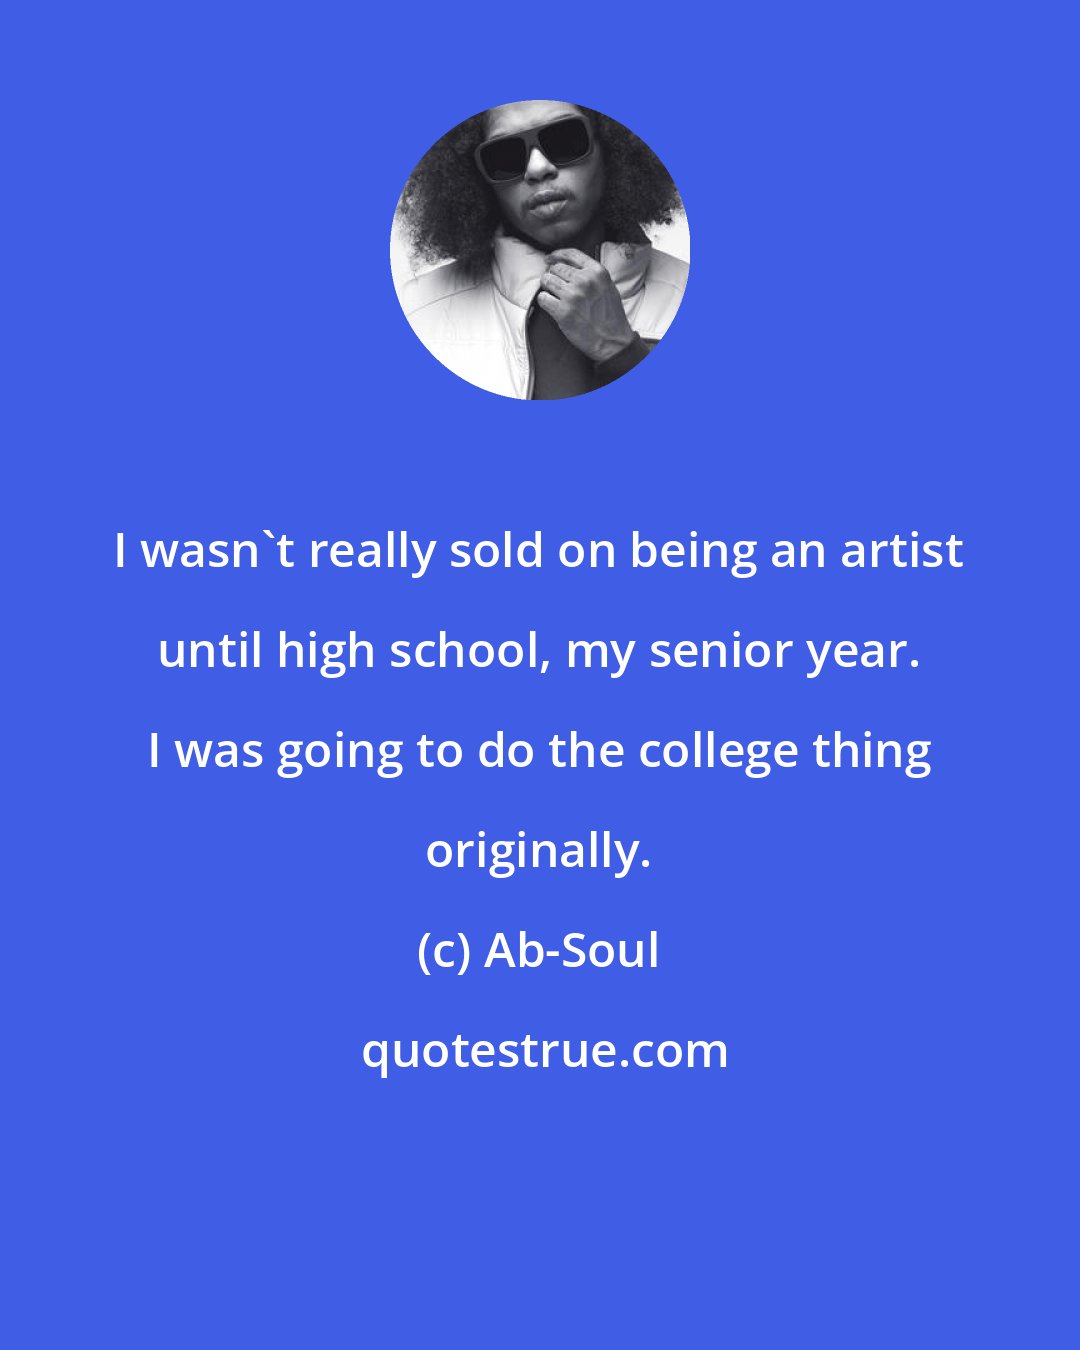 Ab-Soul: I wasn't really sold on being an artist until high school, my senior year. I was going to do the college thing originally.